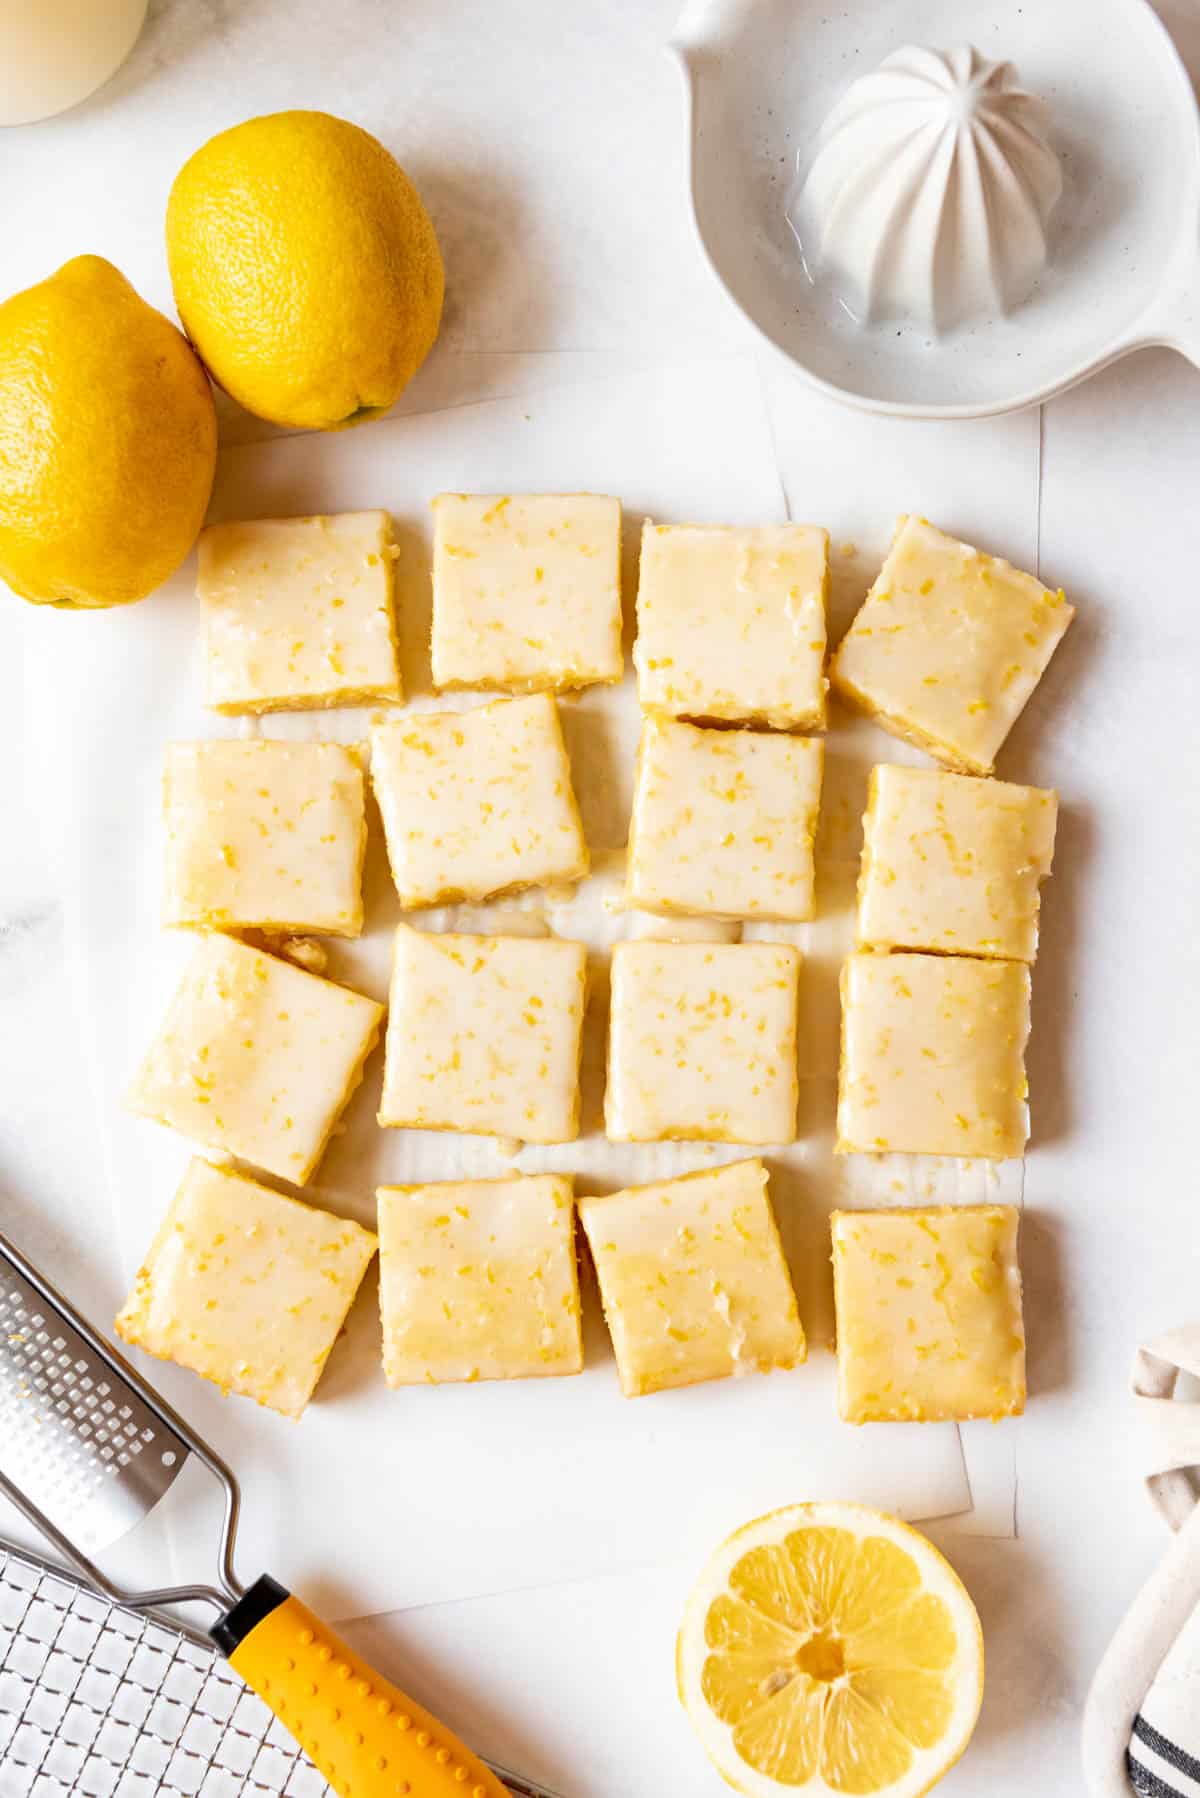 Lemon brownies cut into 16 squares surrounded by fresh lemons.